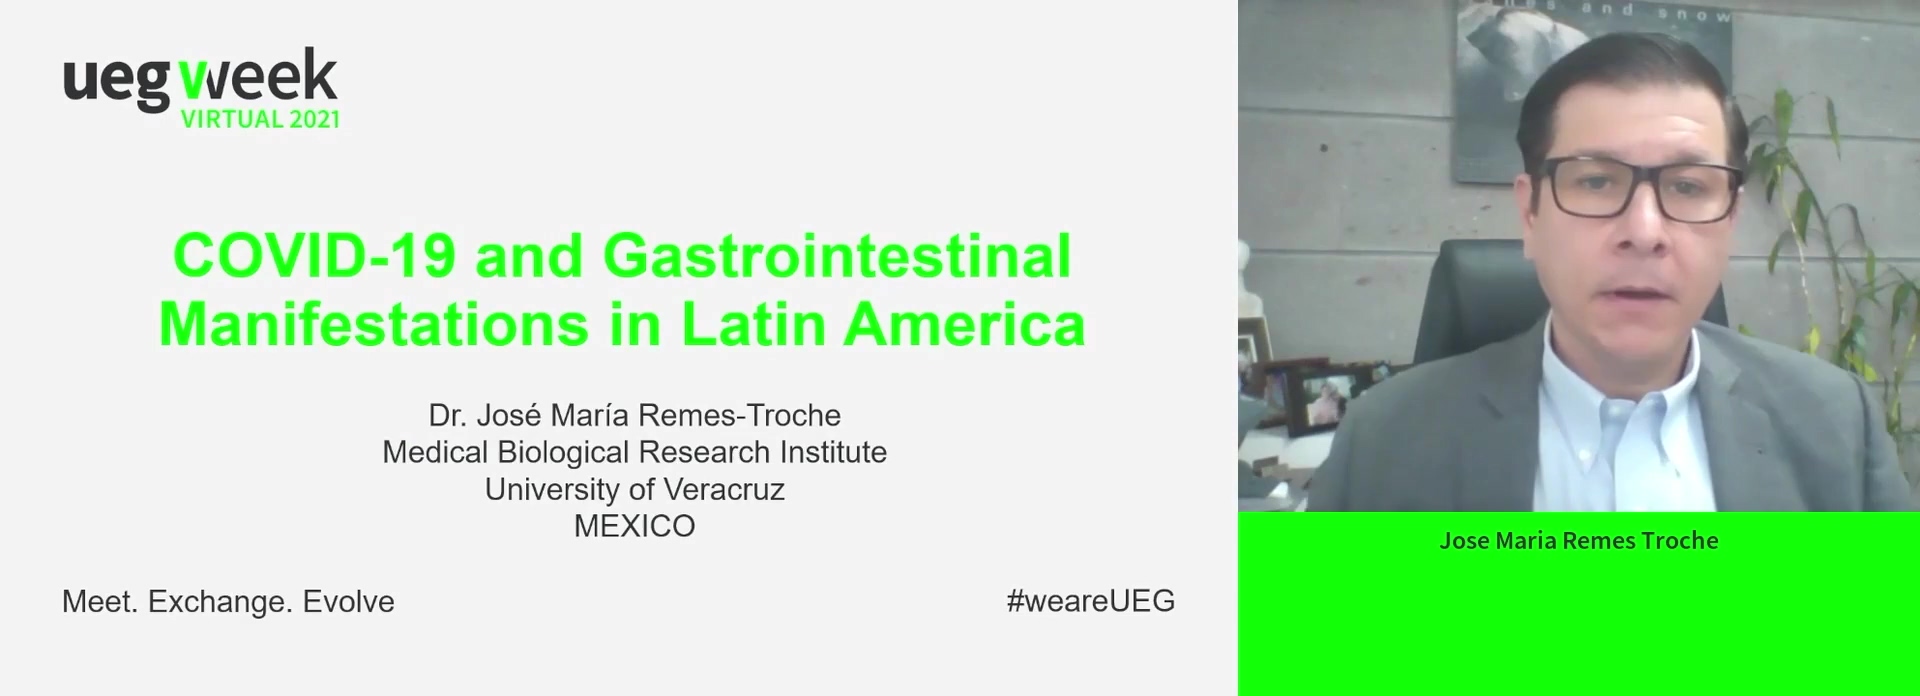 COVID-19 and gastrointestinal manifestations in Latin America